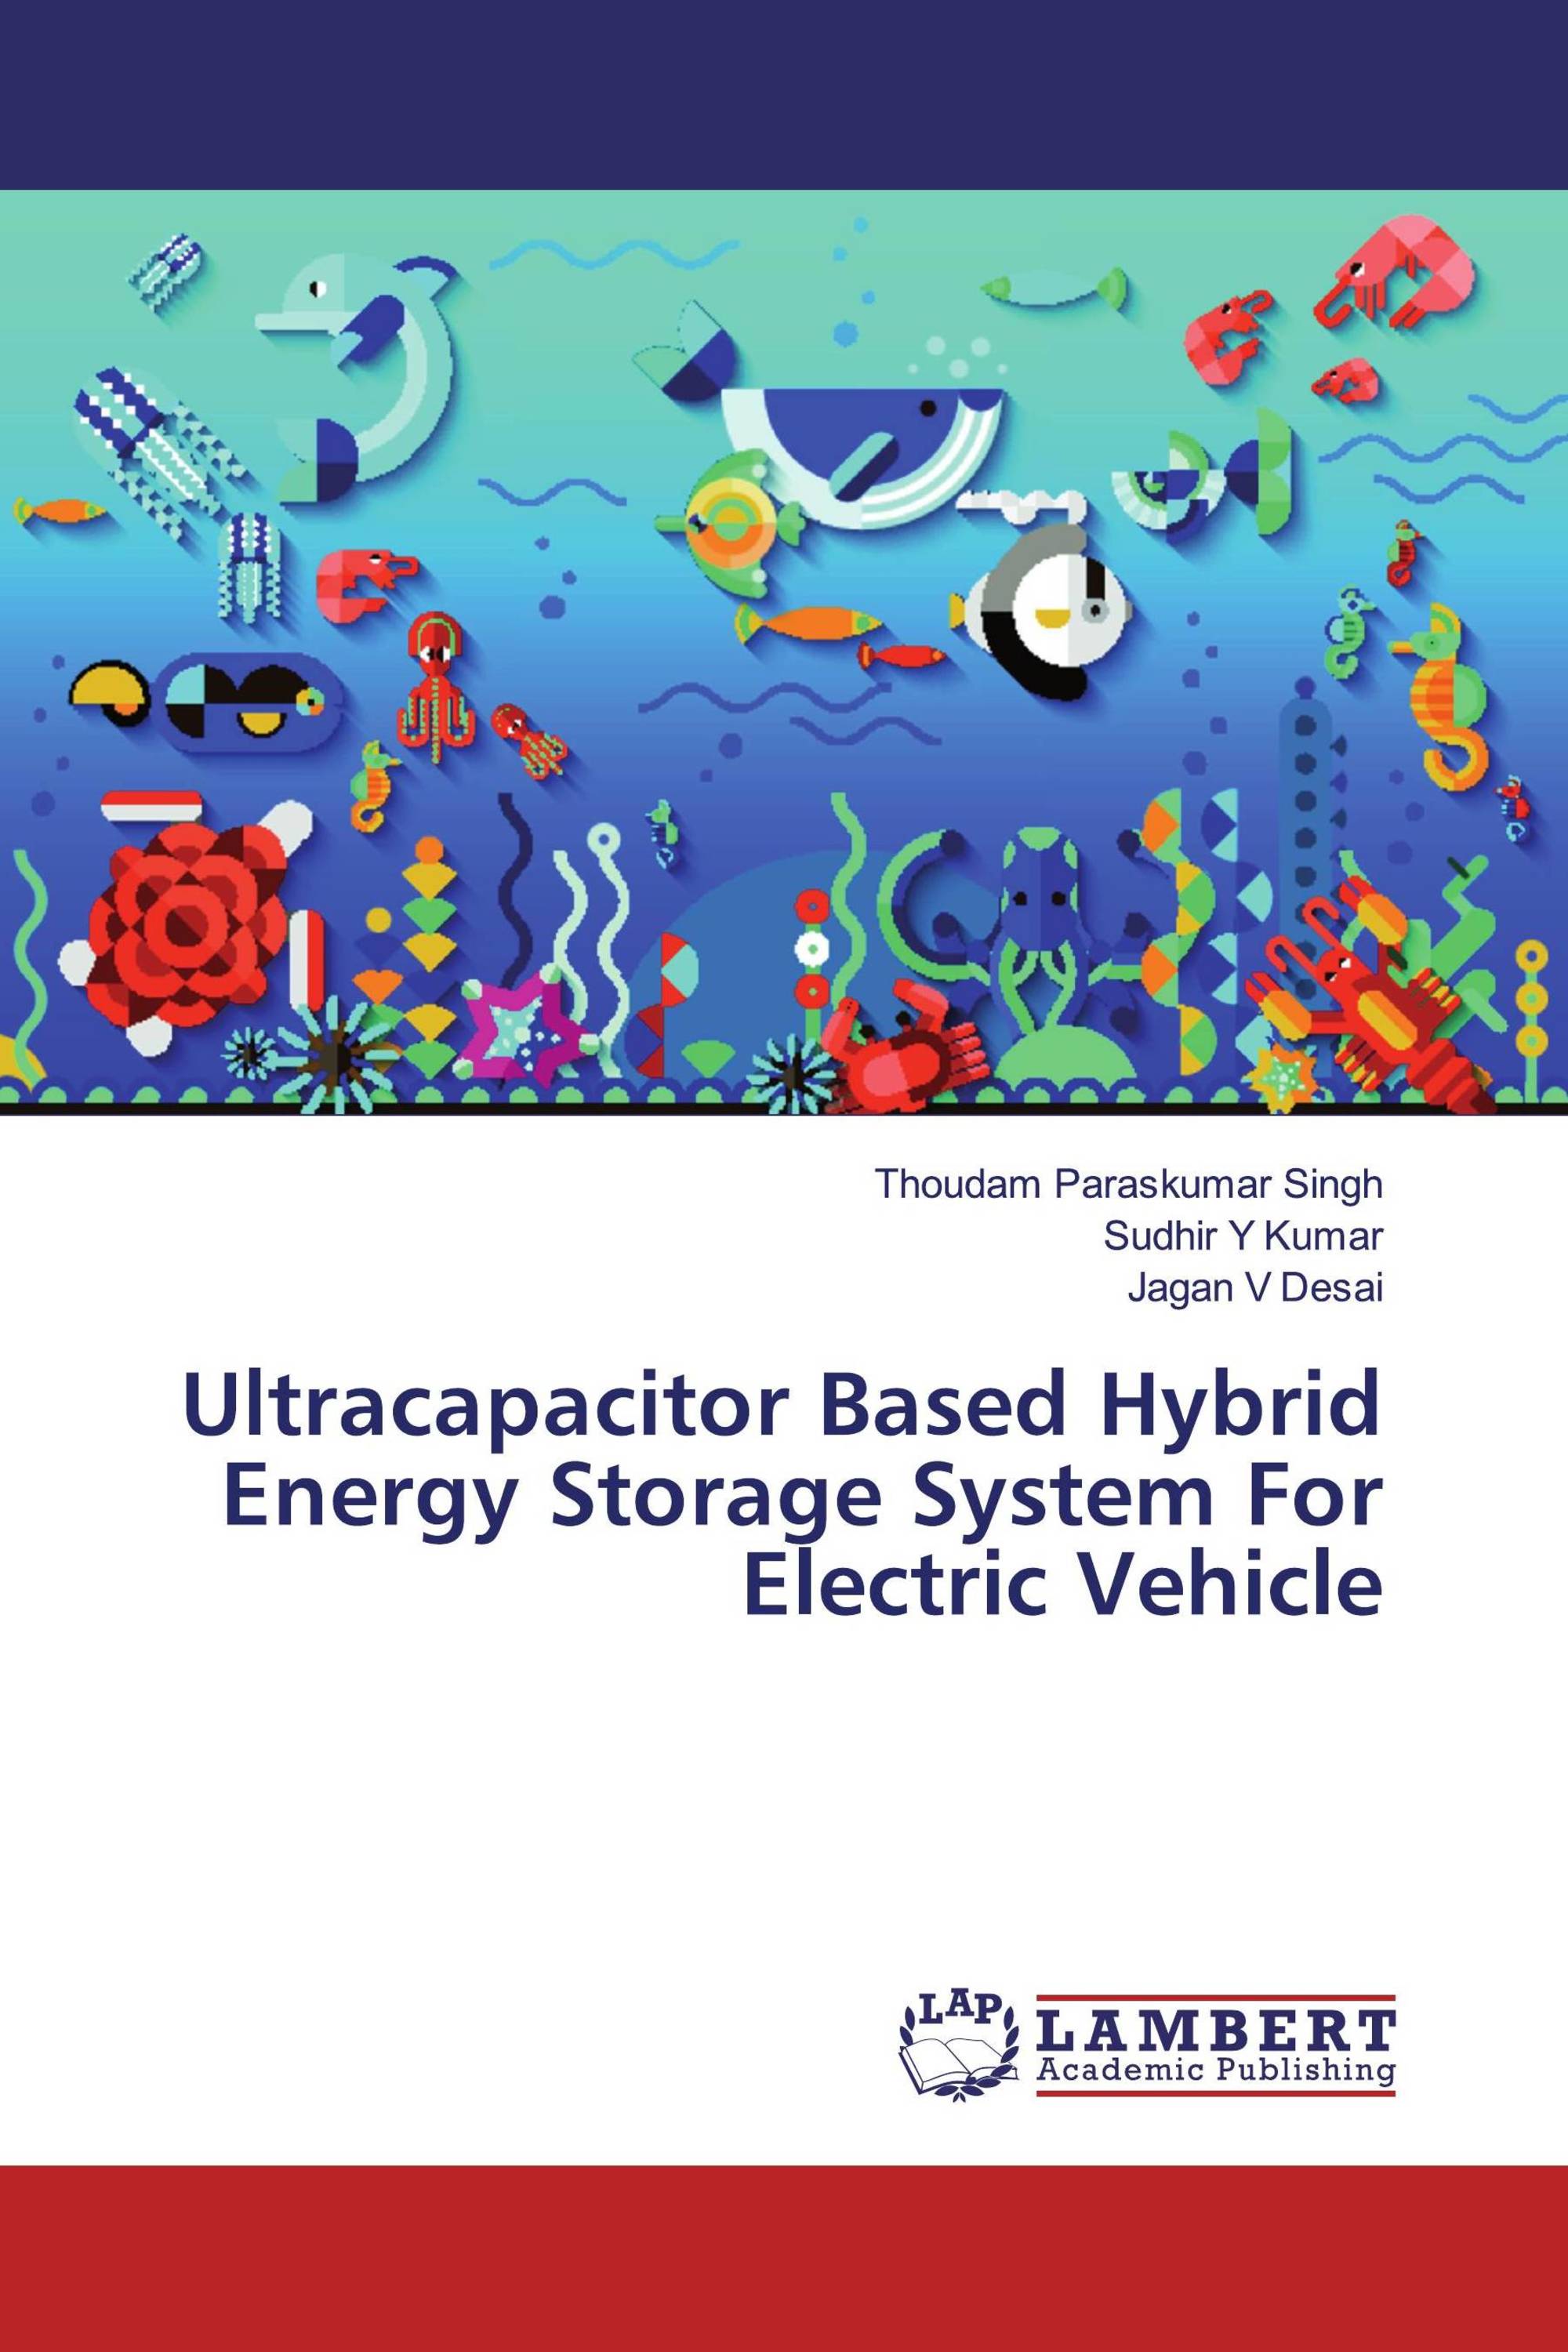 Ultracapacitor Based Hybrid Energy Storage System For Electric Vehicle